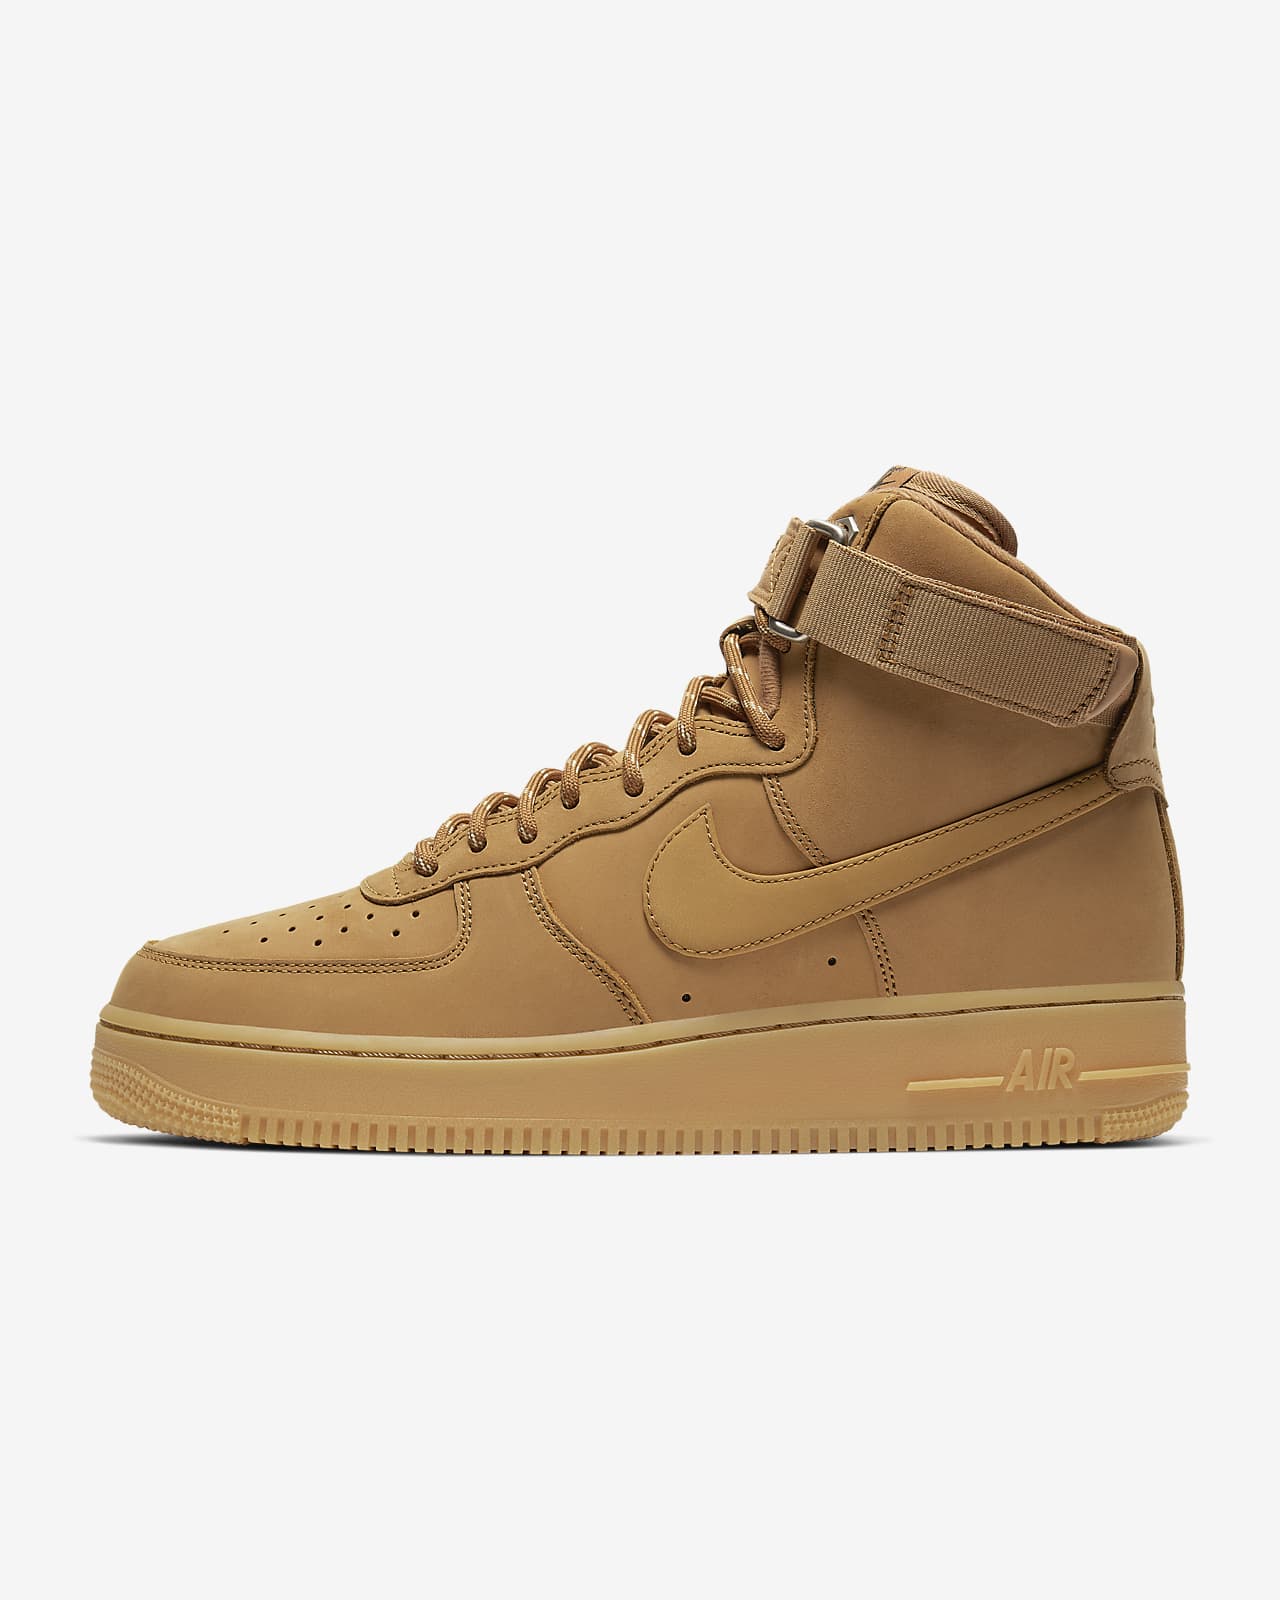 Nike Air Force 1 High '07 Men's Shoes 